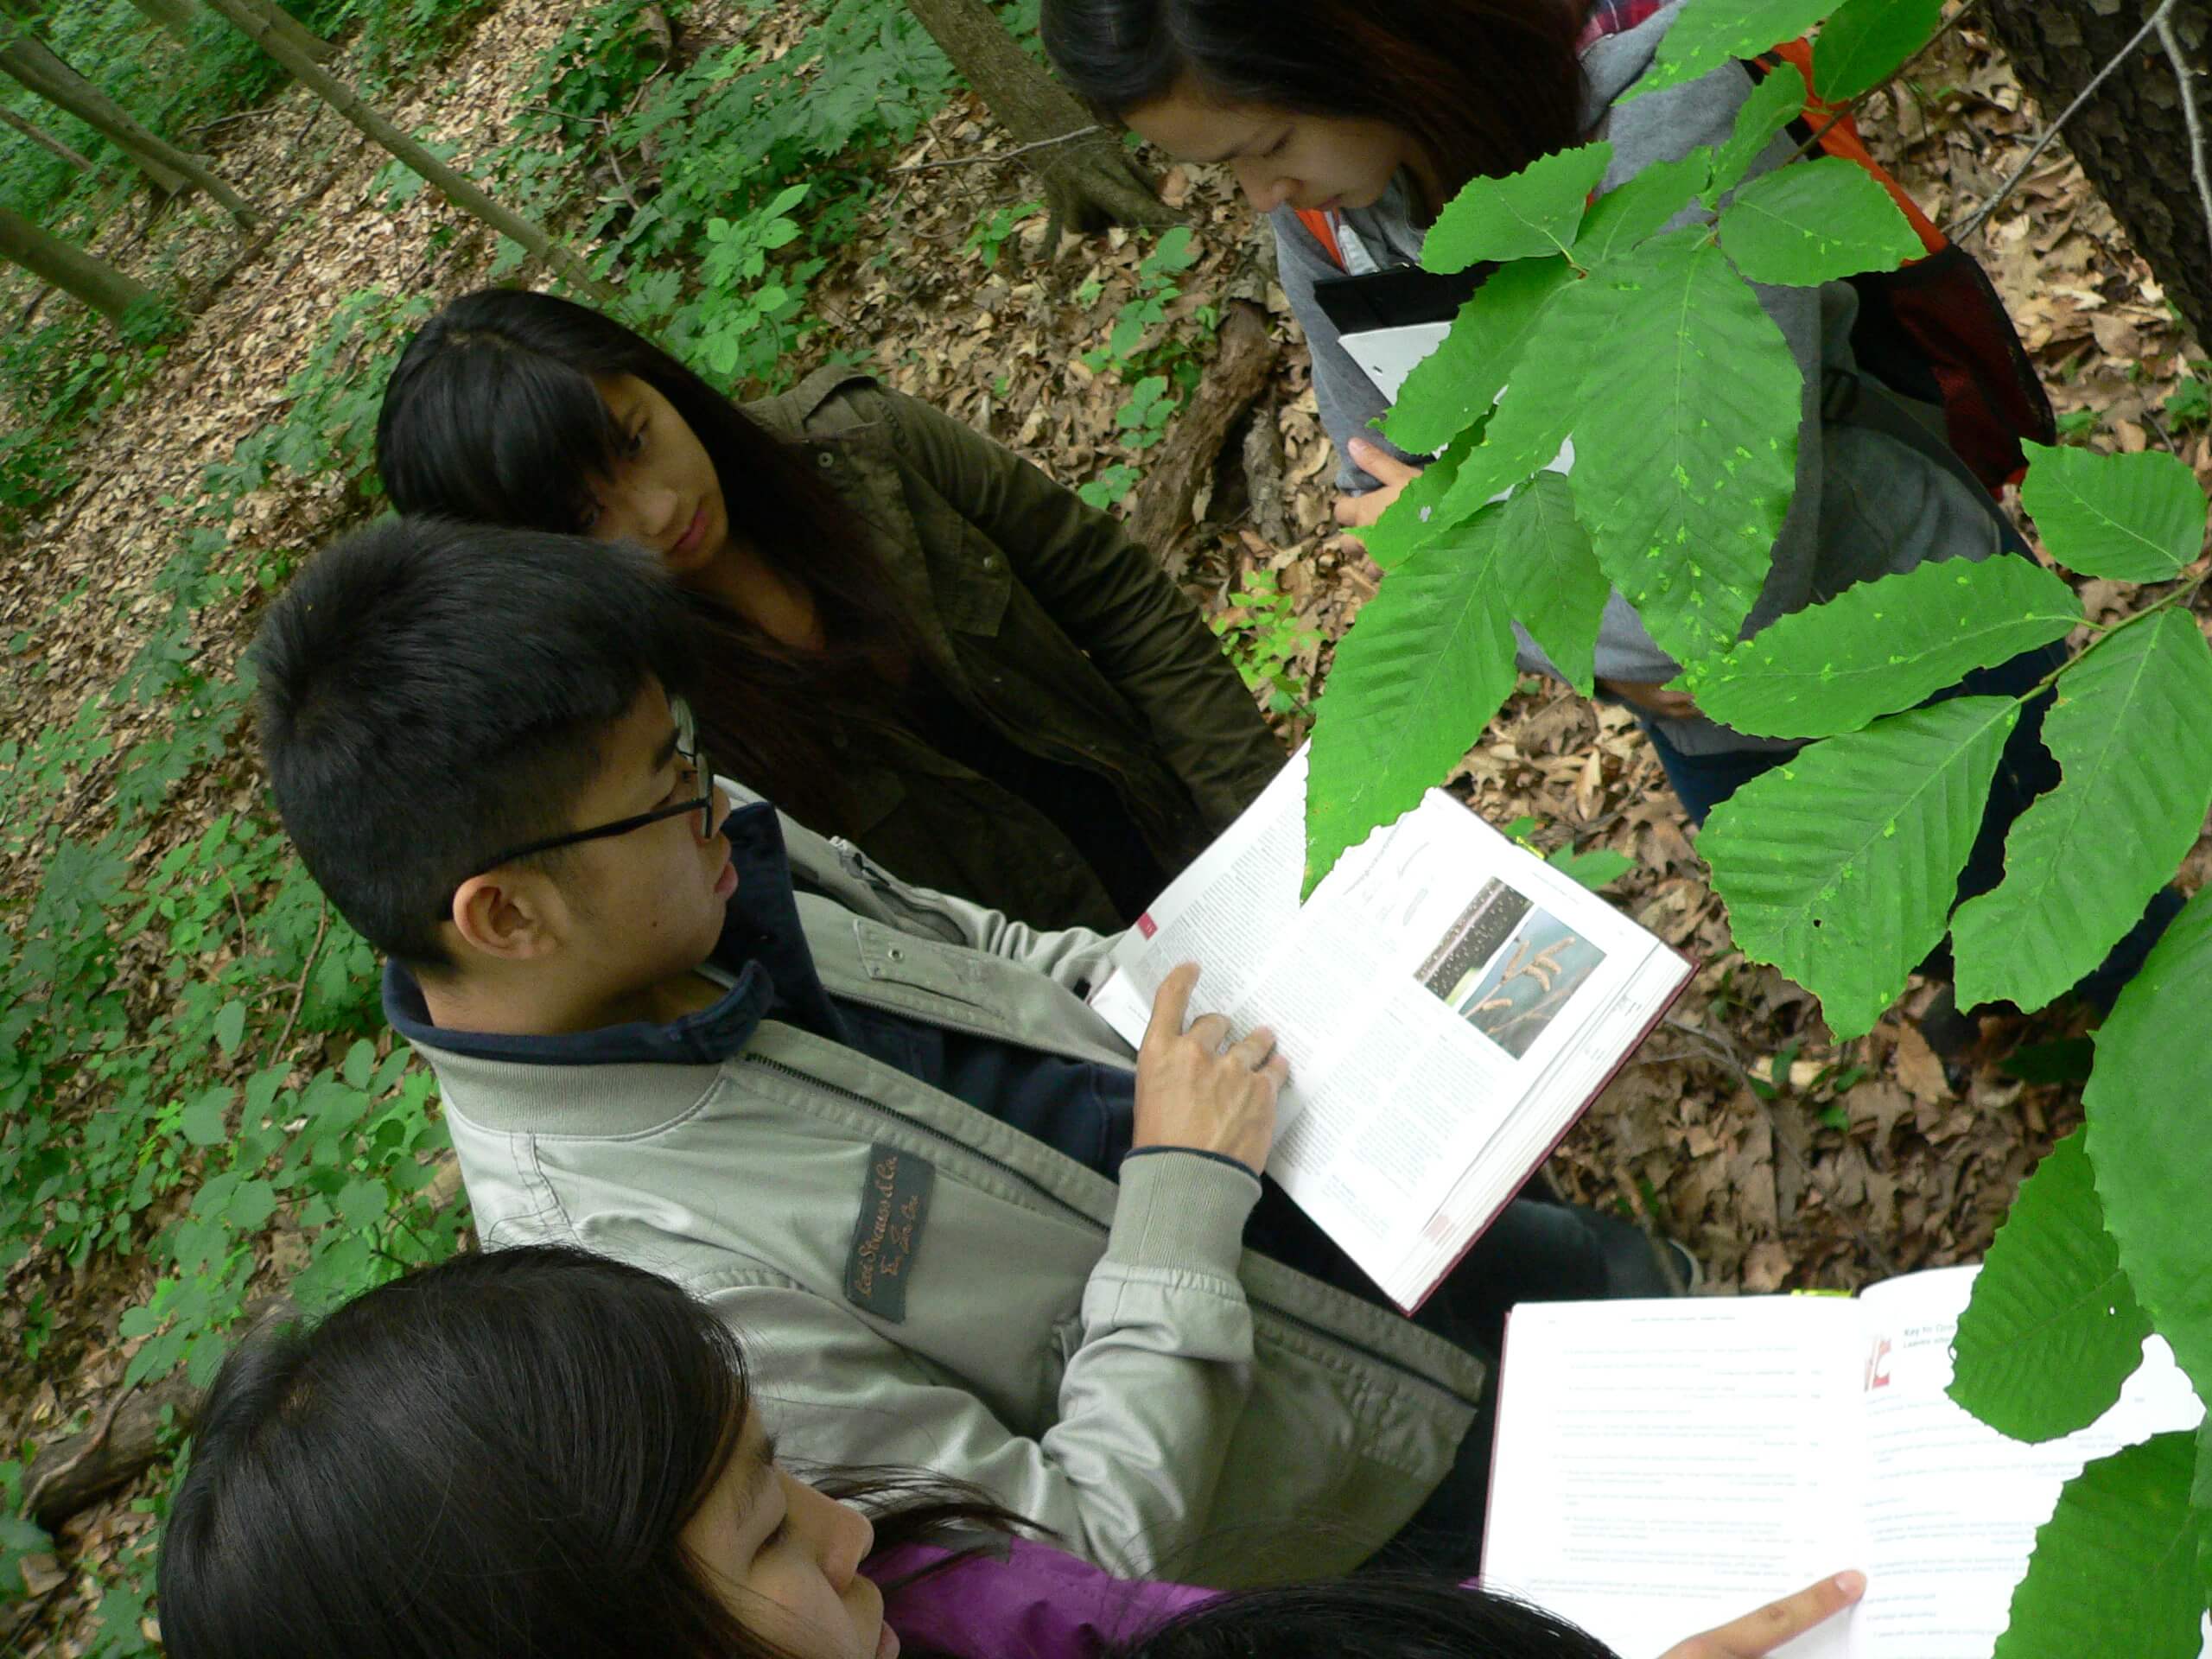 Students trying to identify a tree using an identification book